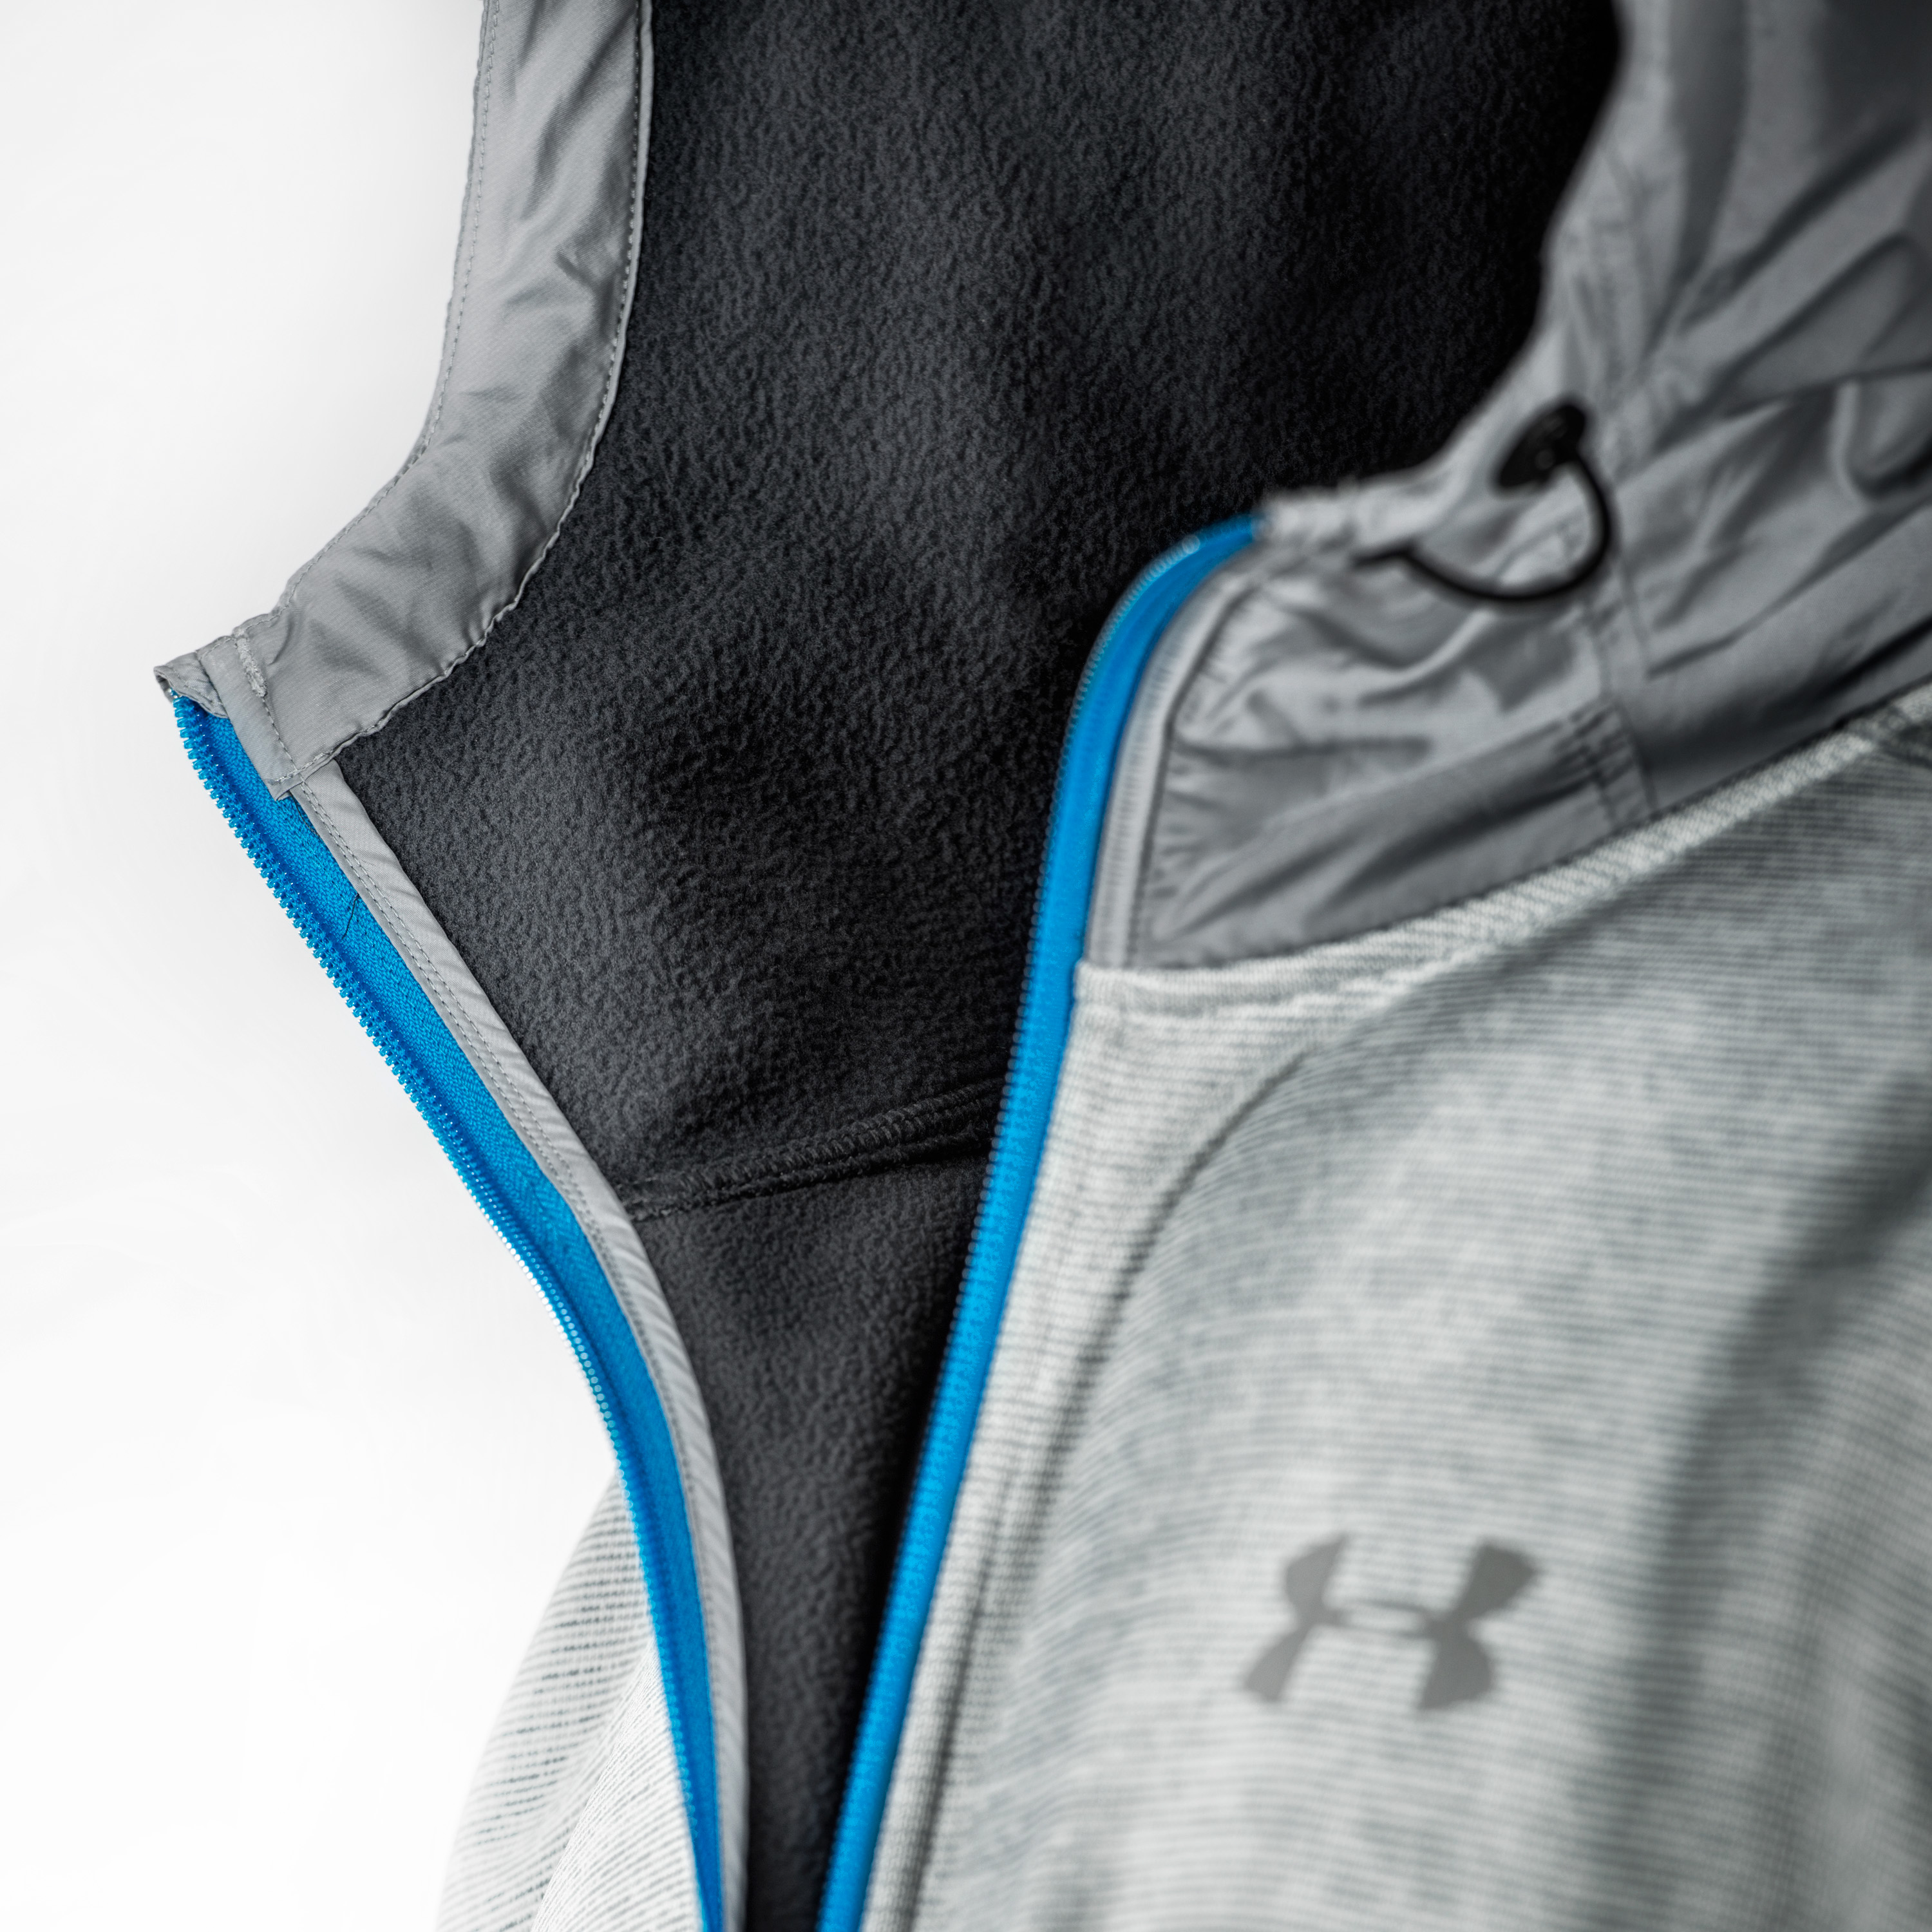 Under Armour: SWACKET - Product Design & Photography